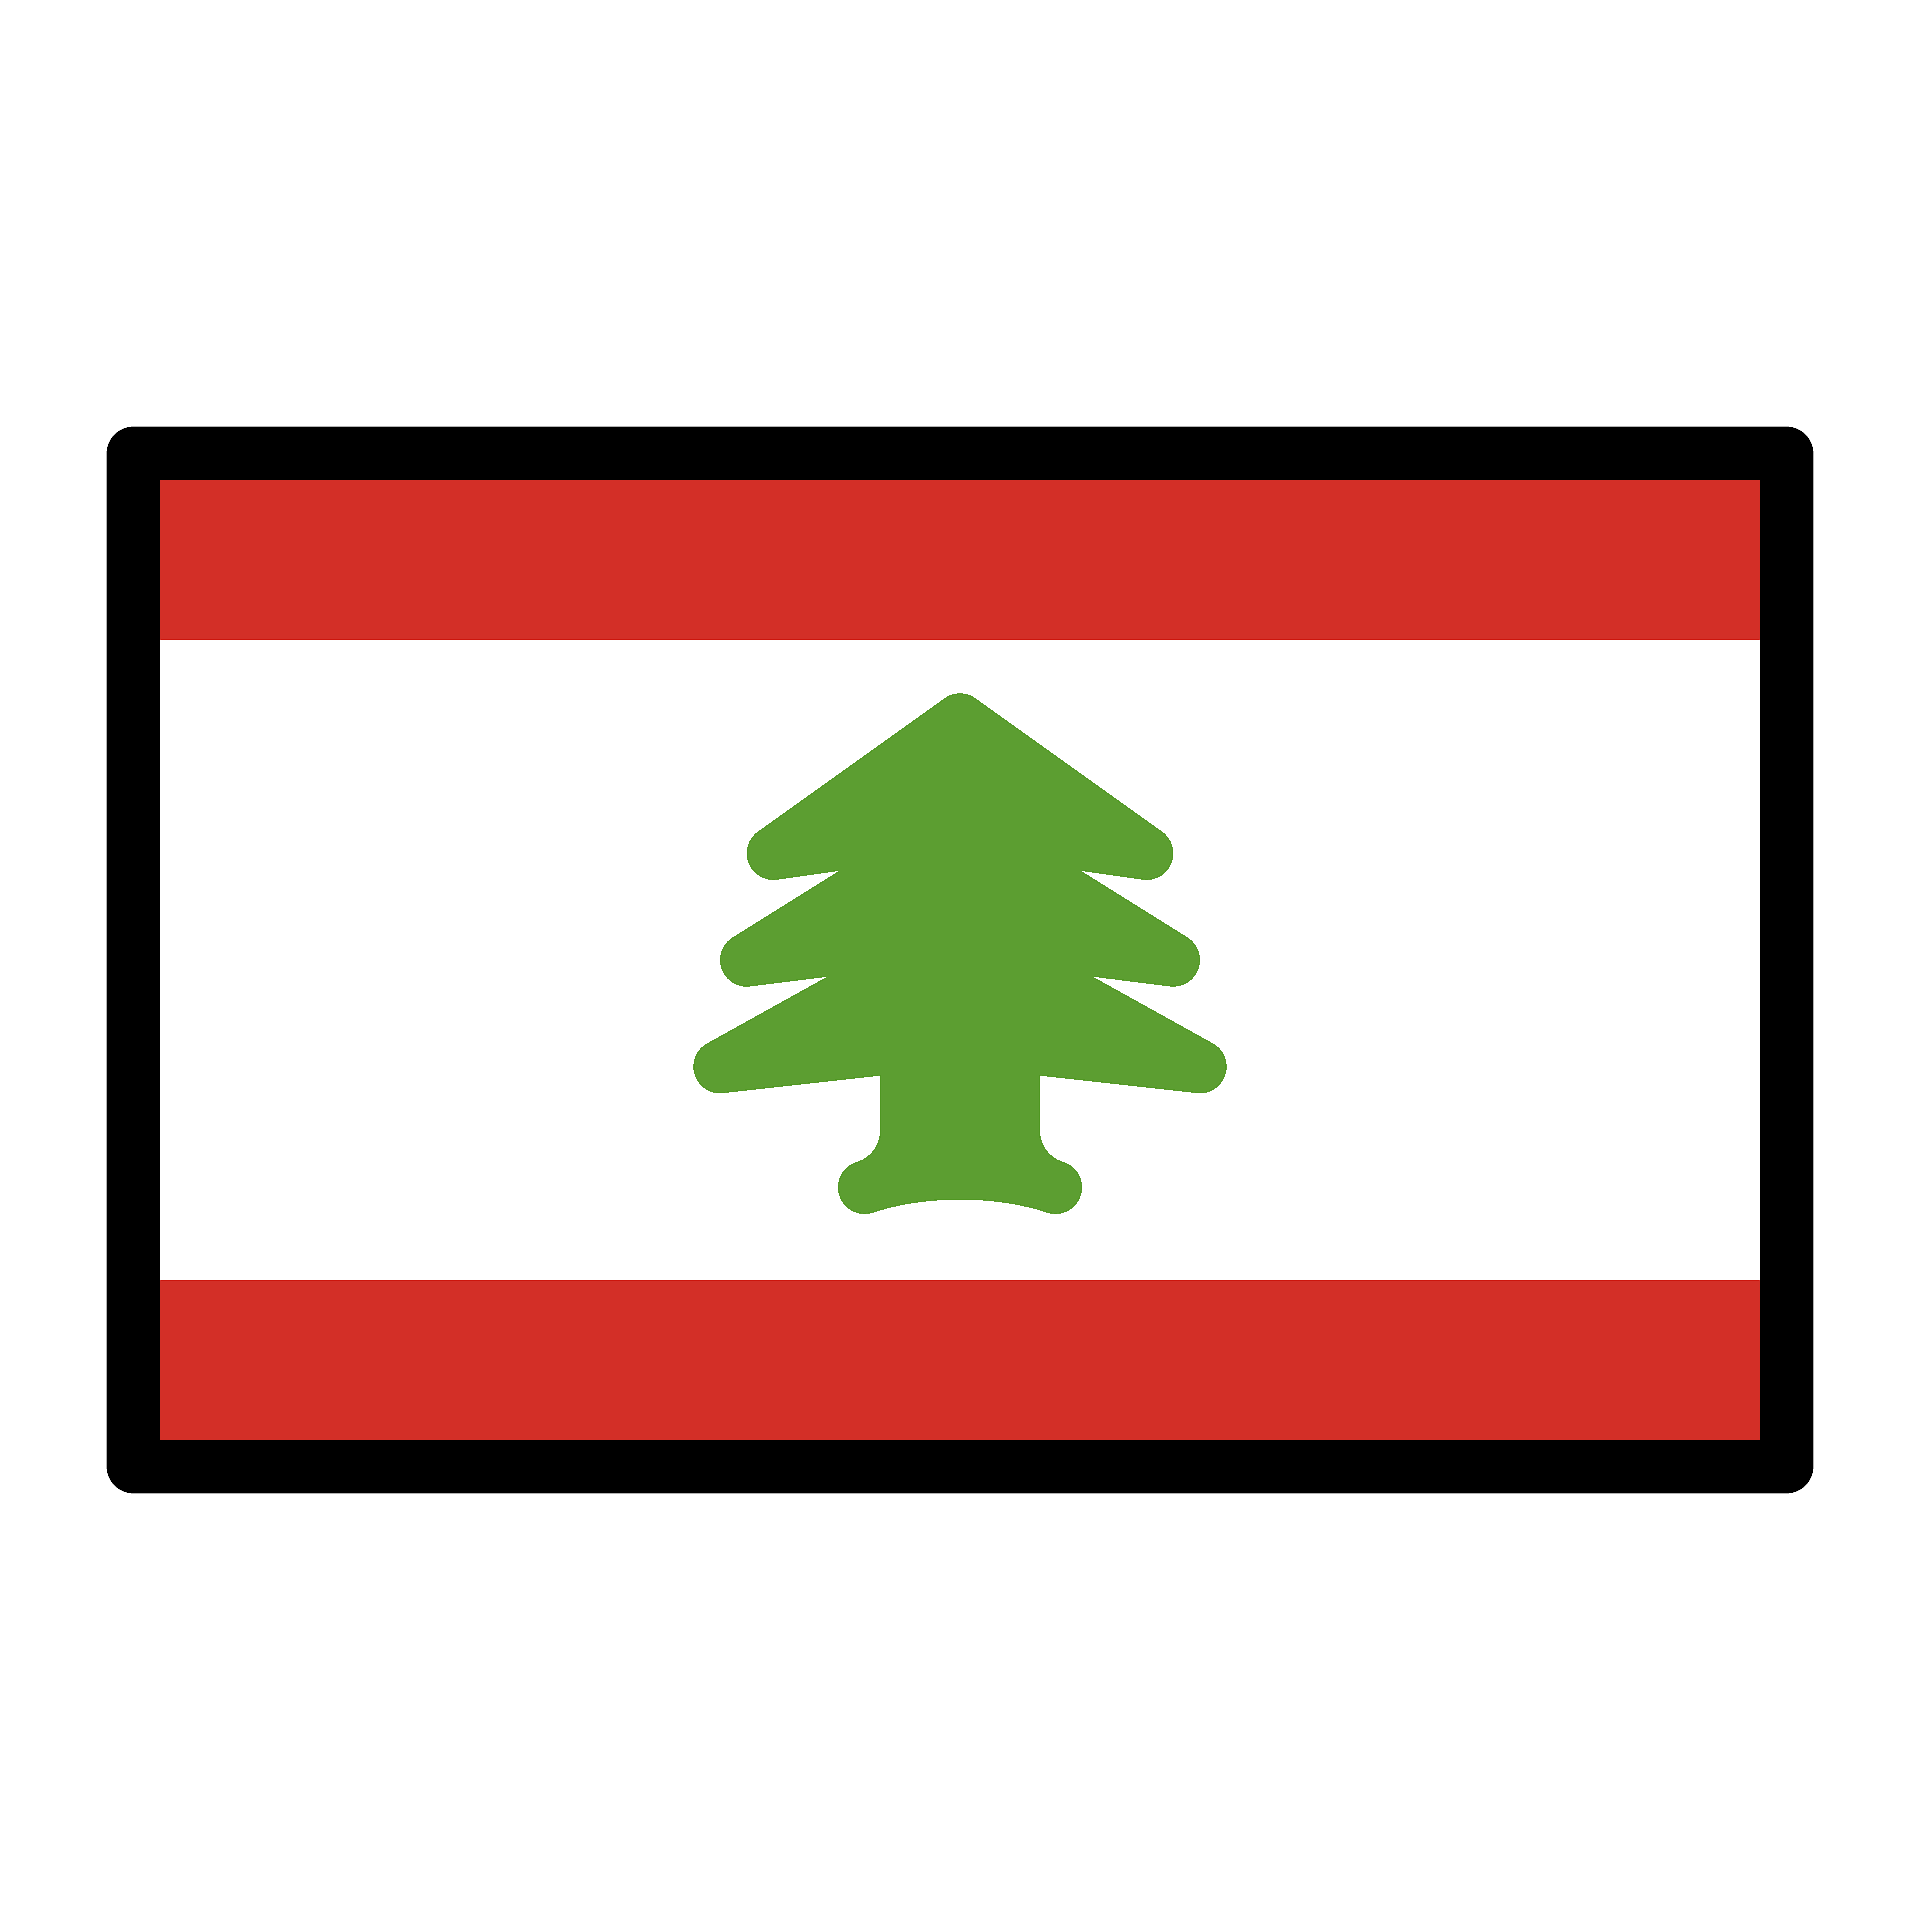 A Red And White Flag With A Green Tree On It